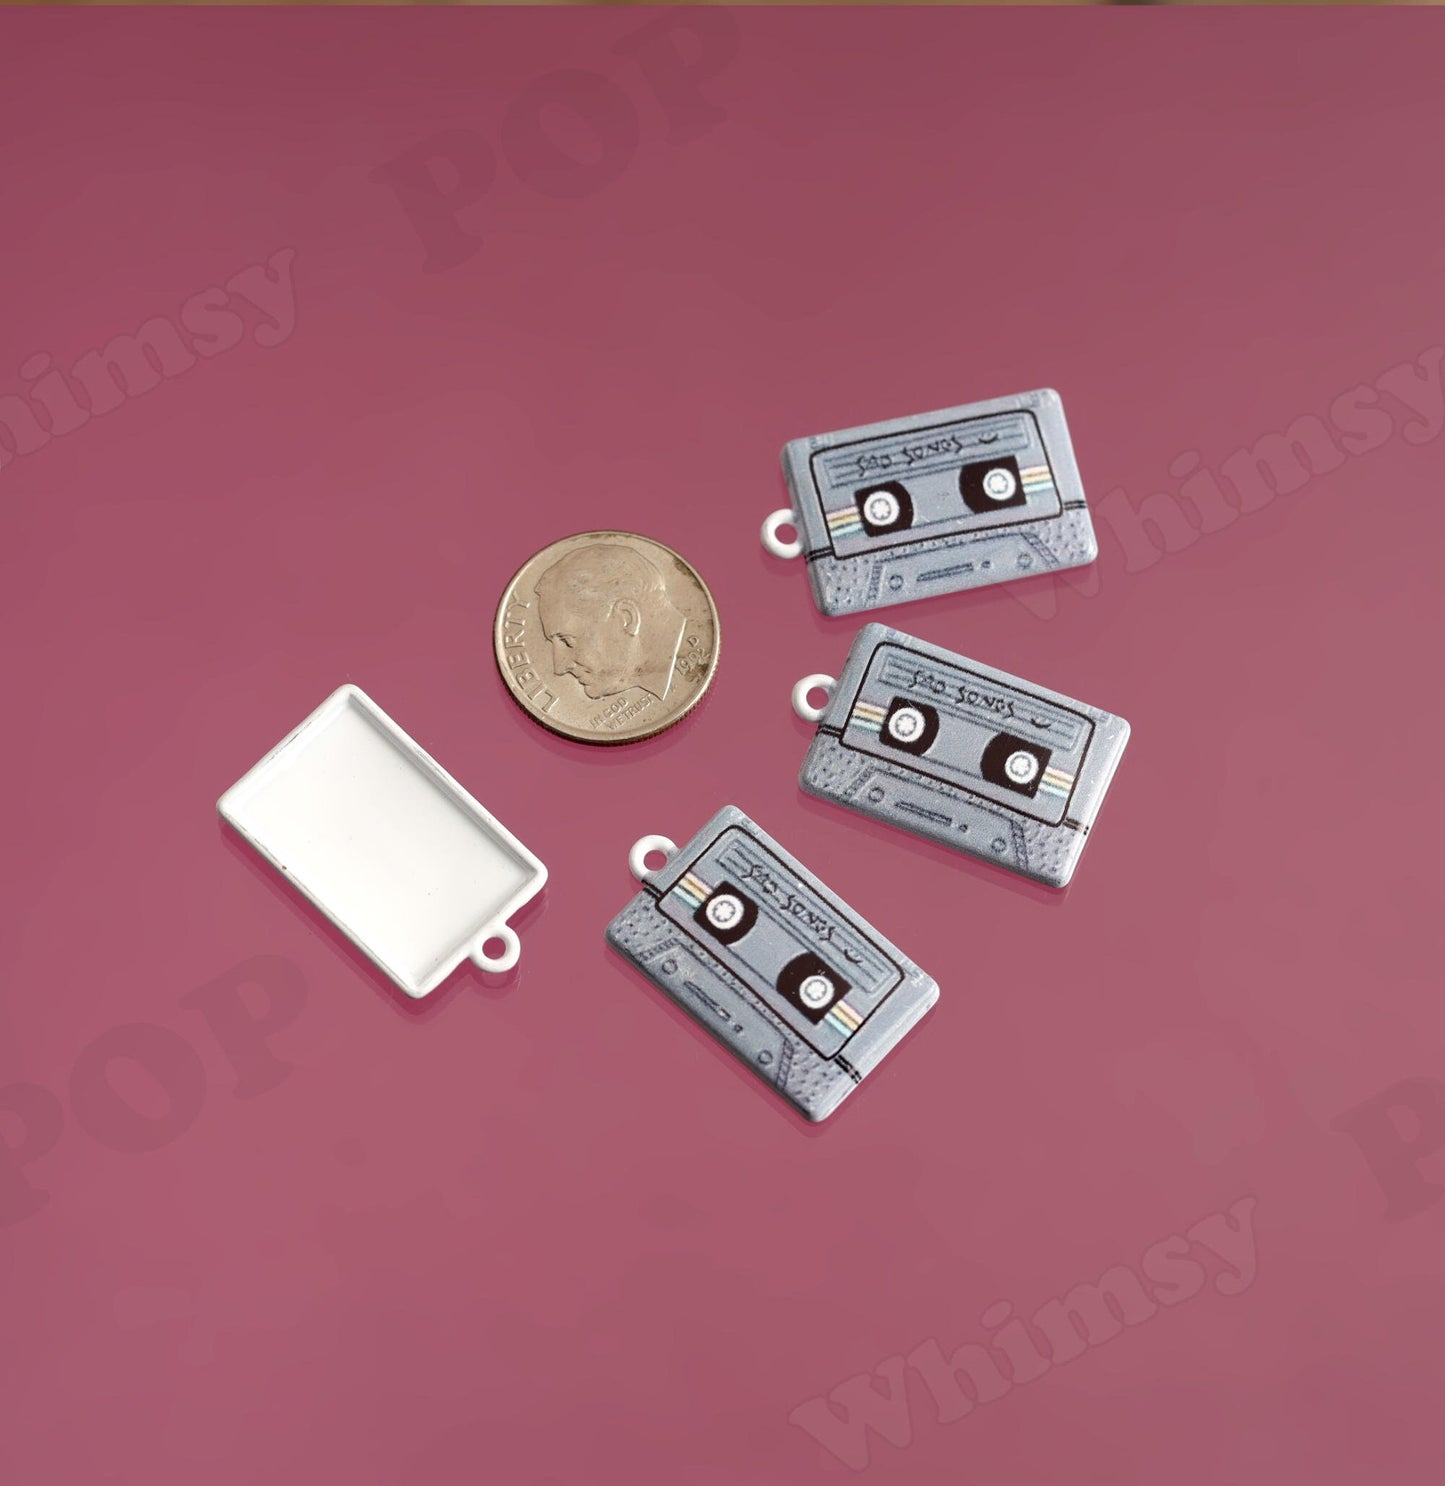 Retro Cassette Tape Charms, Mixed Tape Charms and Pendants